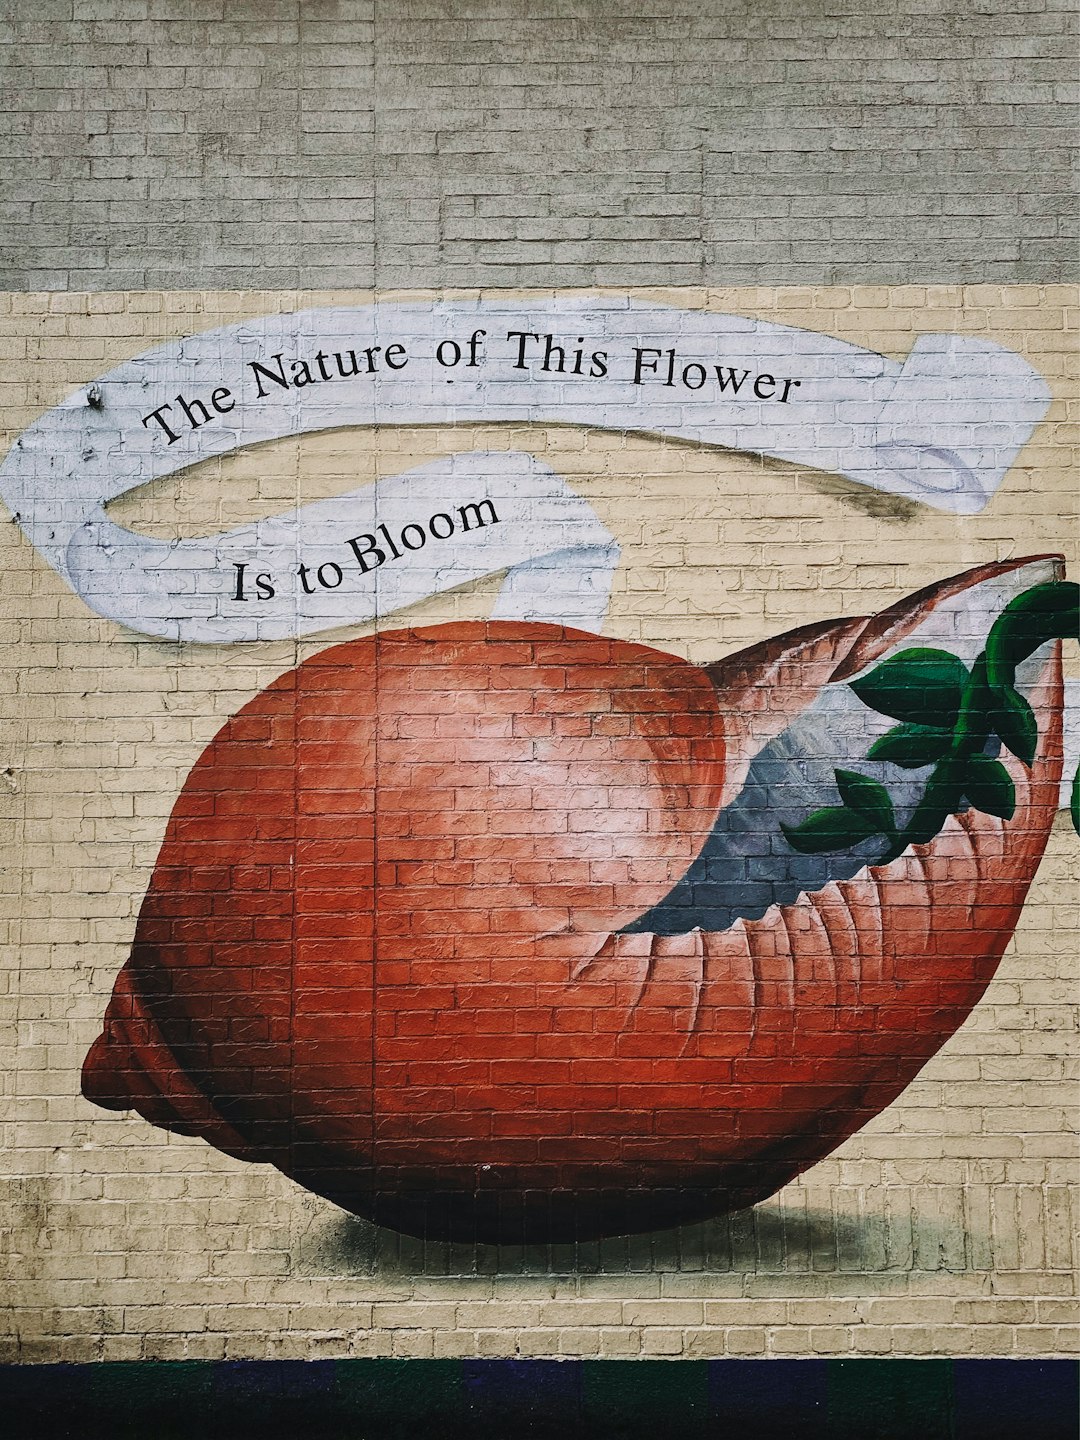 The Nature of This Flower is to Bloom graffiti